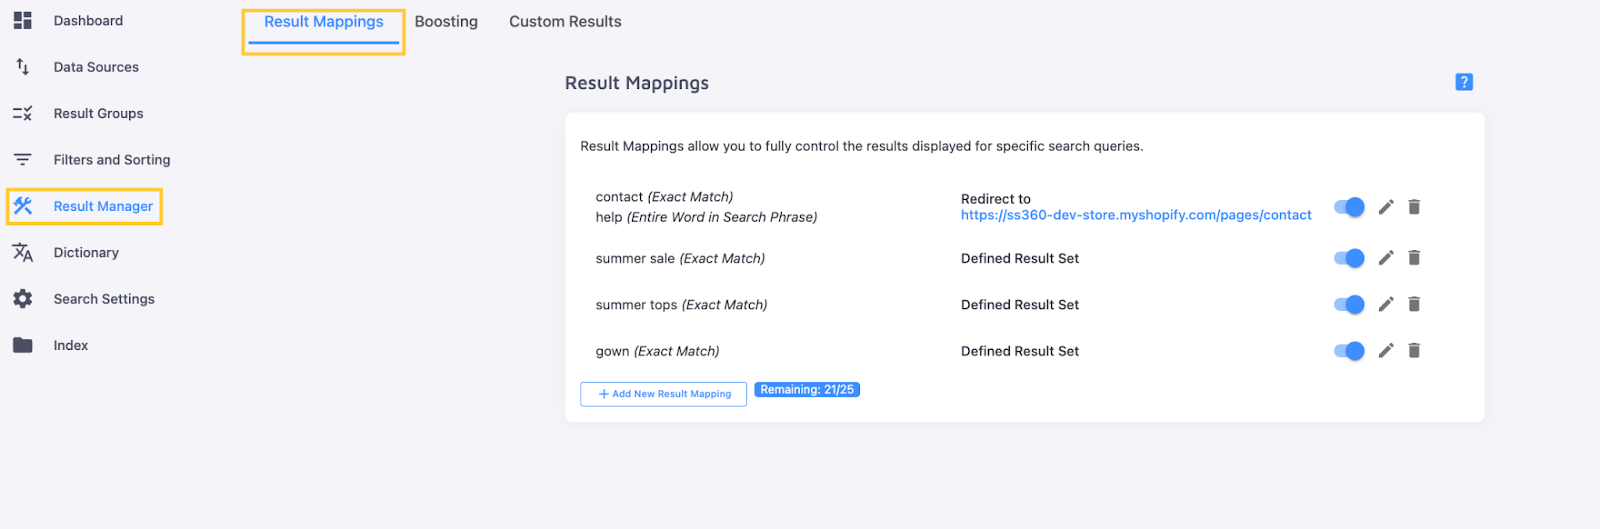 Result Mappings tab